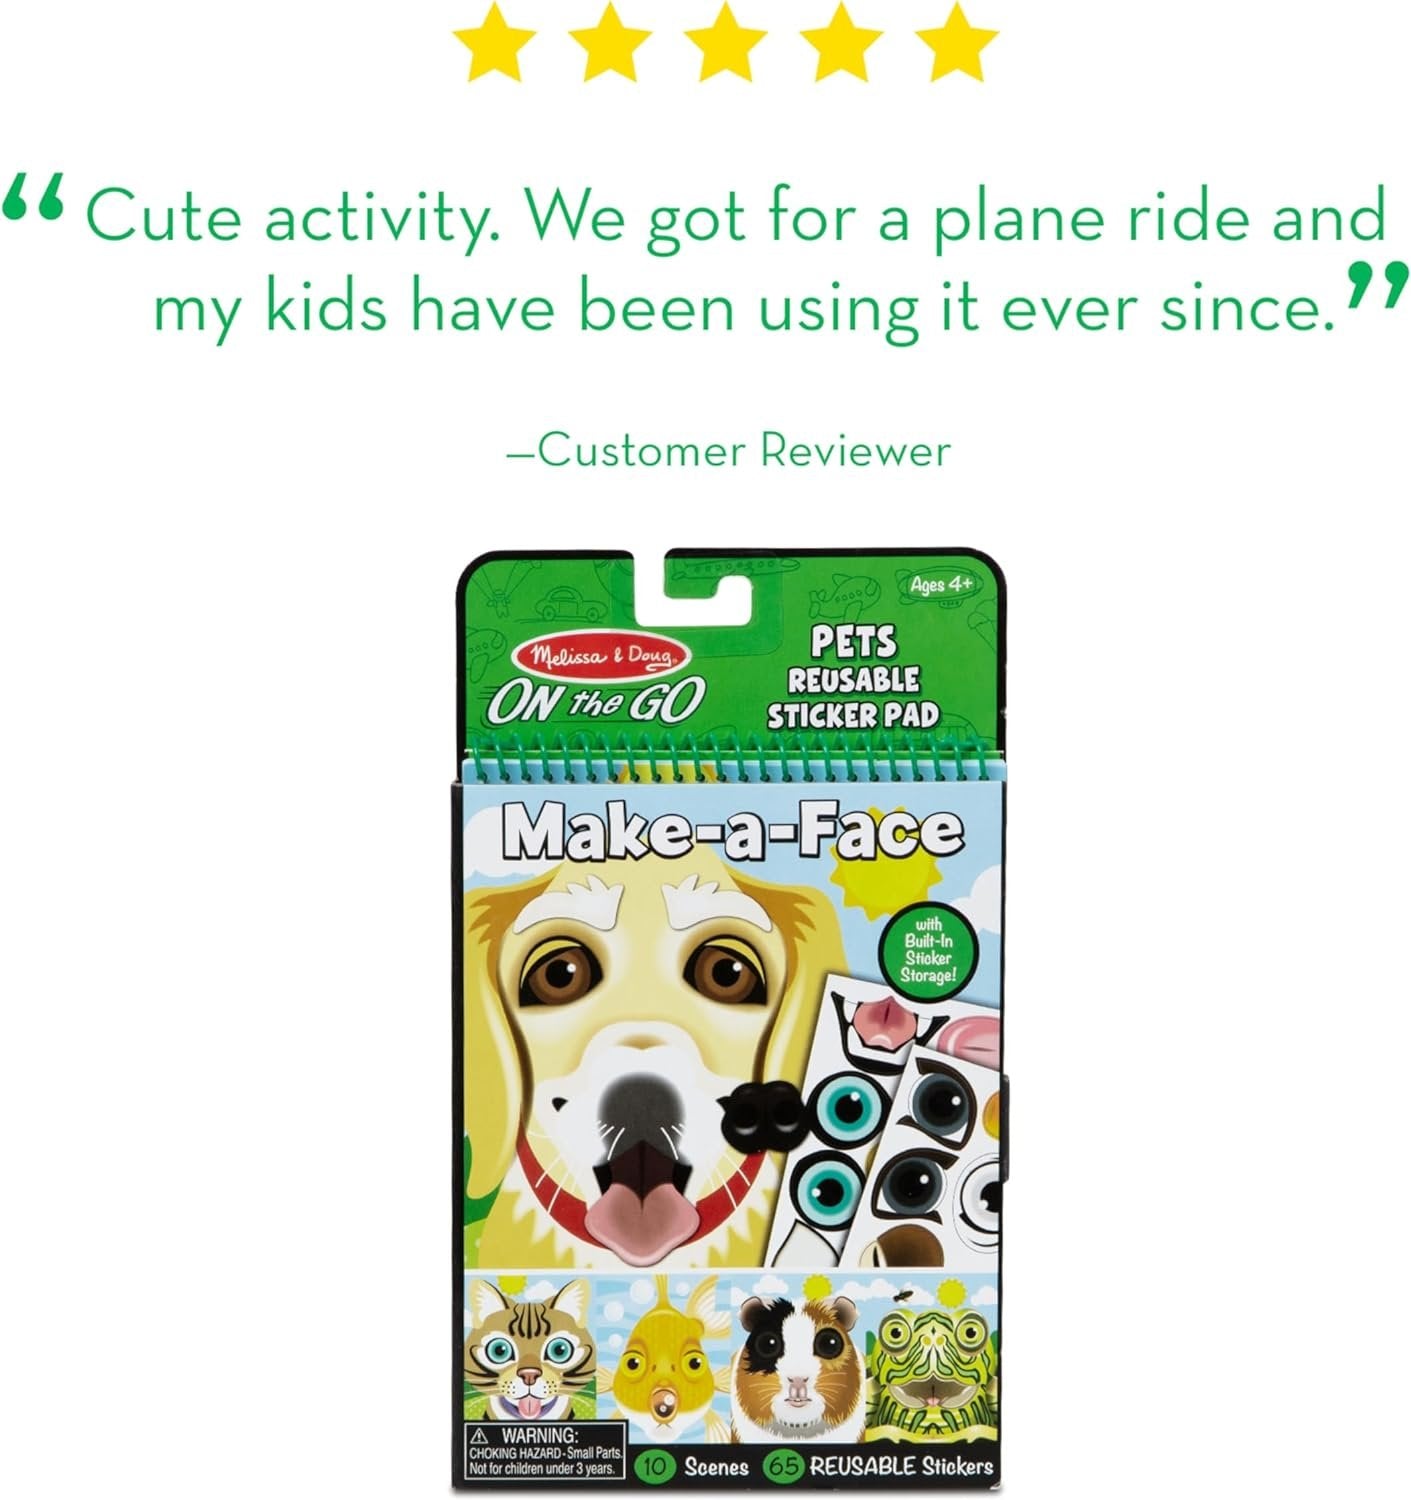 Melissa & Doug On the Go Make-a-Face Reusable Sticker Pad Travel Toy Activity Book – Pet Animals (10 Scenes, 65 Cling Stickers)